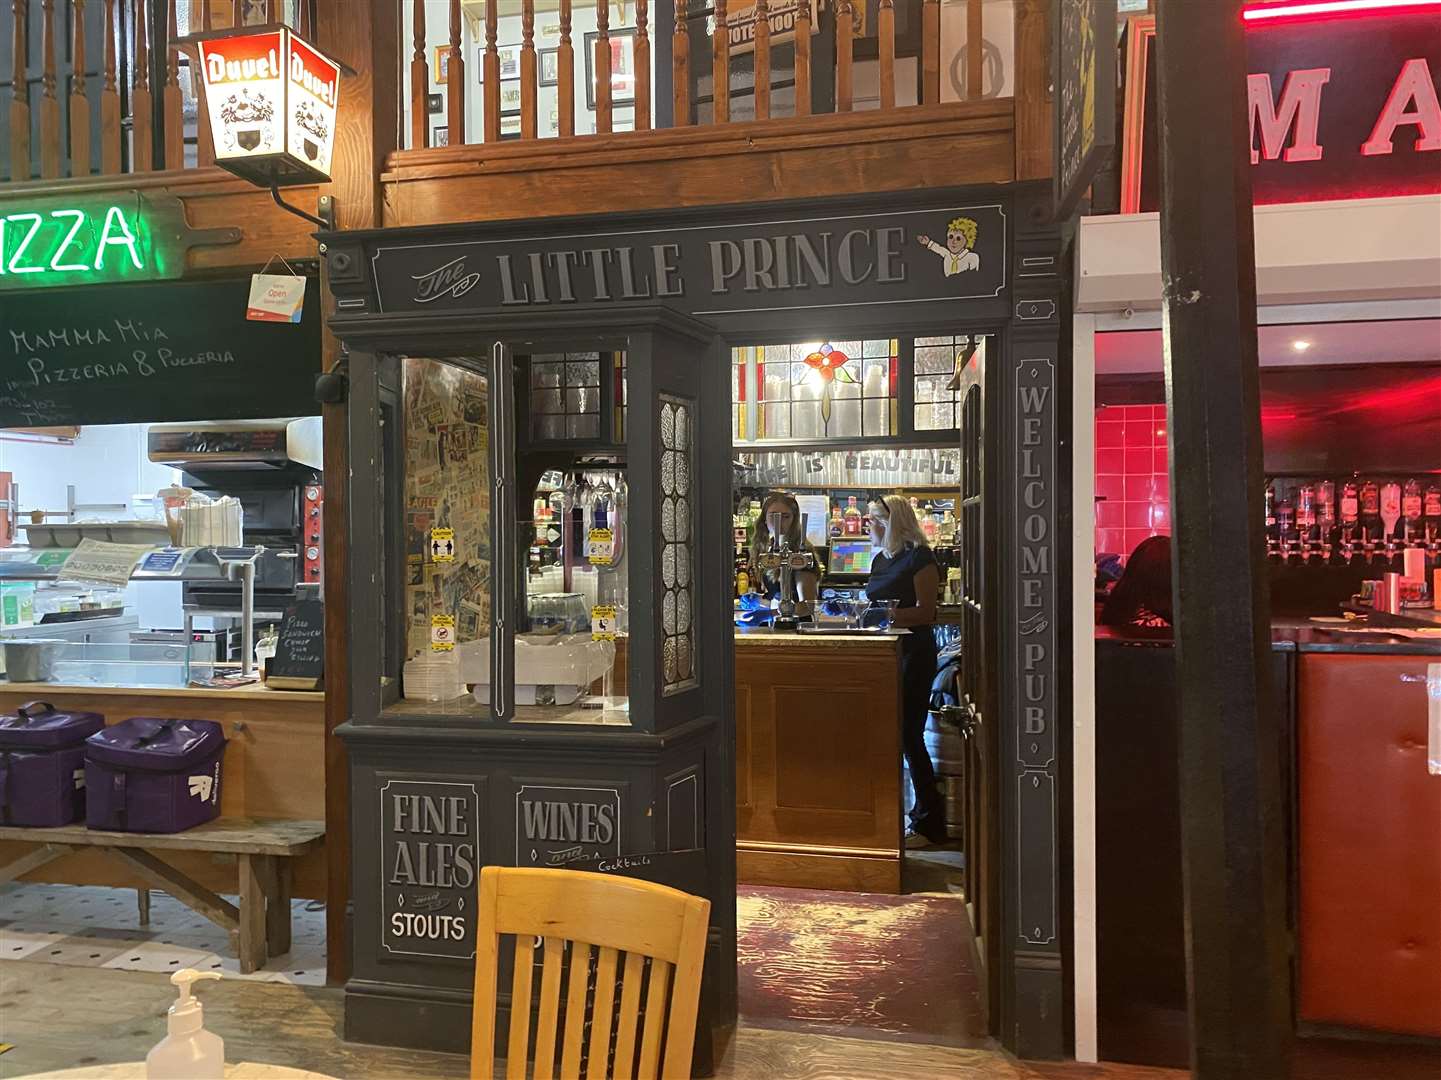 The Little Prince, located in The Old Kent Market in Fort Hill, Margate, is believed to be the smallest pub in the UK. It re-opened today, on Super Saturday